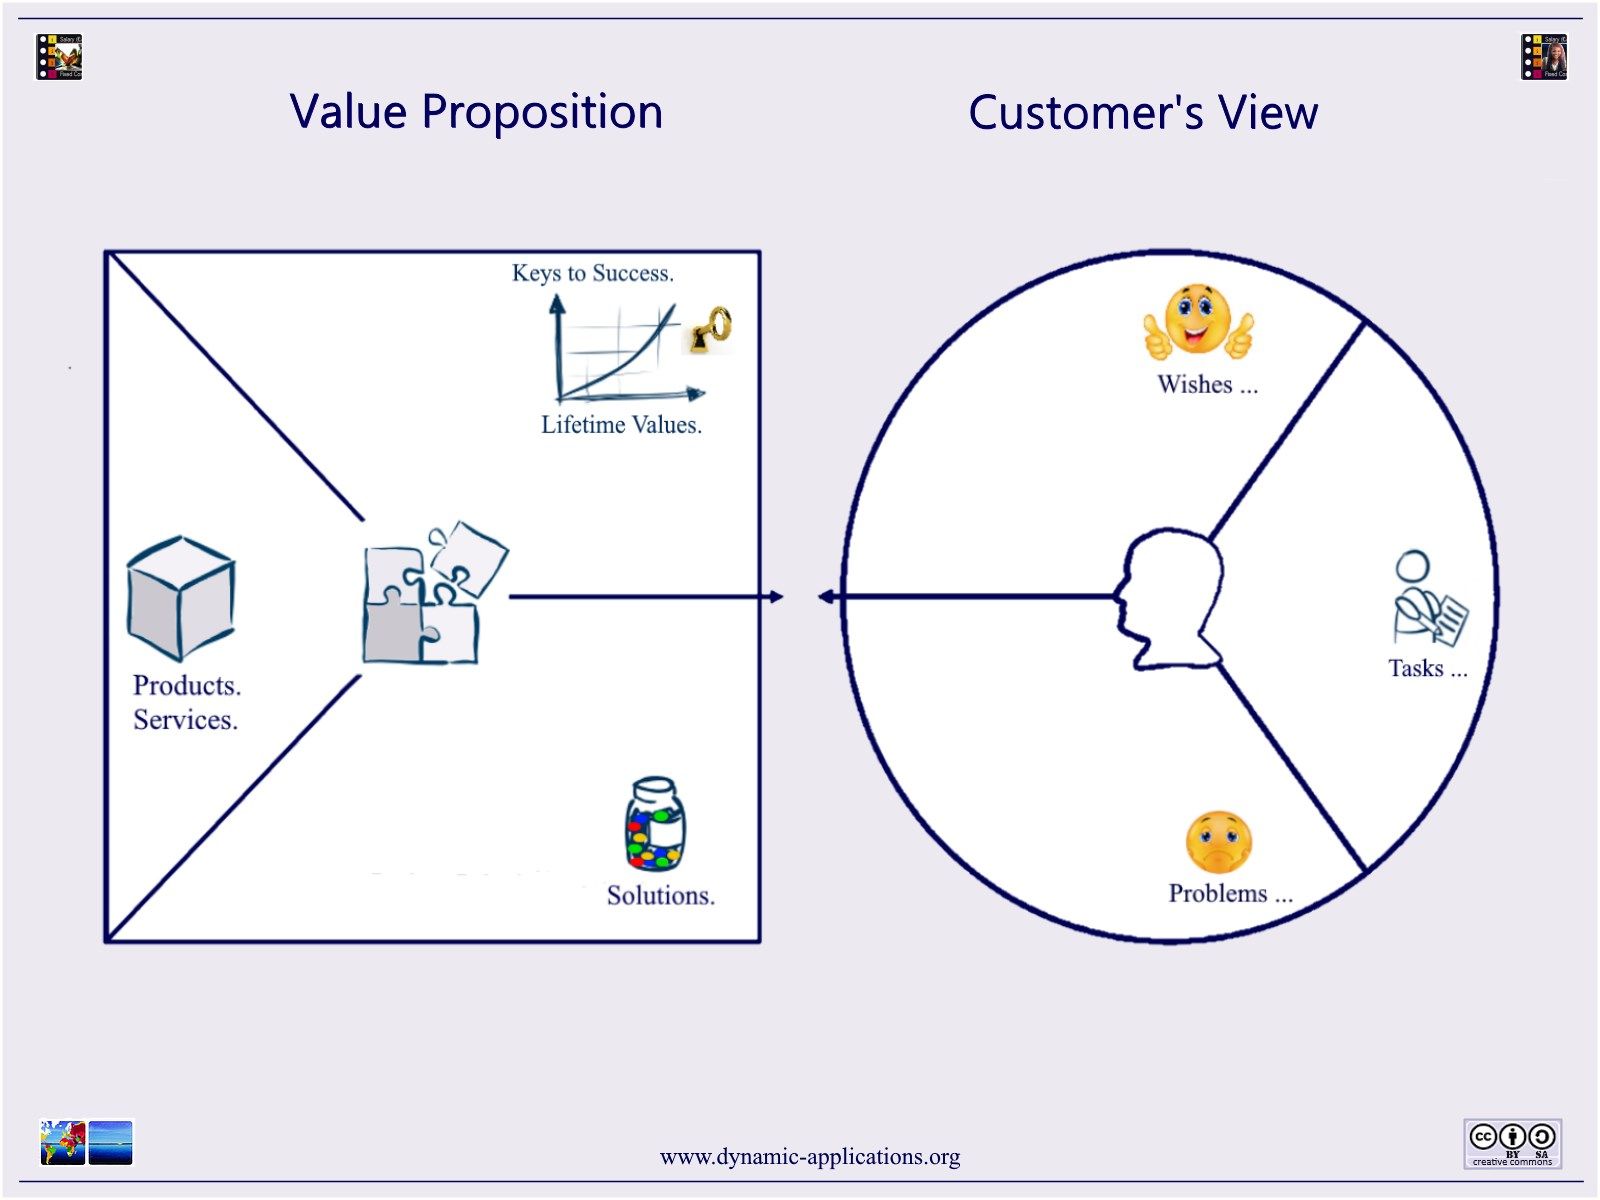 Value Proposition Canvas - define Products and Services in Lifetime Value ($€& / h).